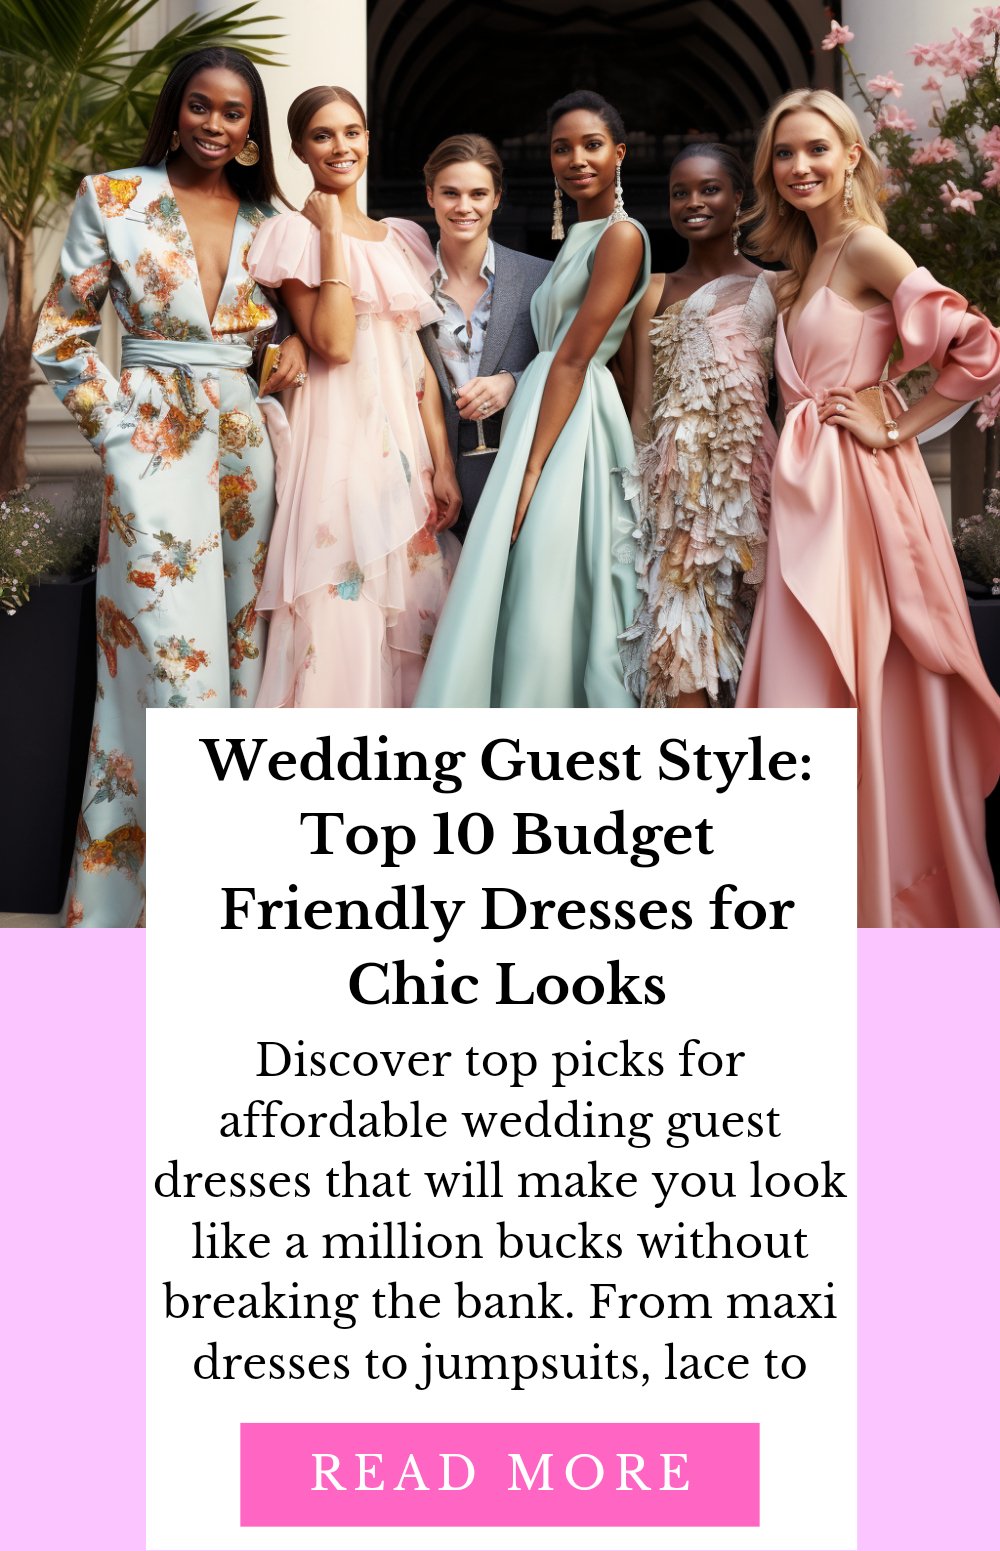 10 Affordable Wedding Guest Dresses for Women: Style on a Budget - TGC Boutique